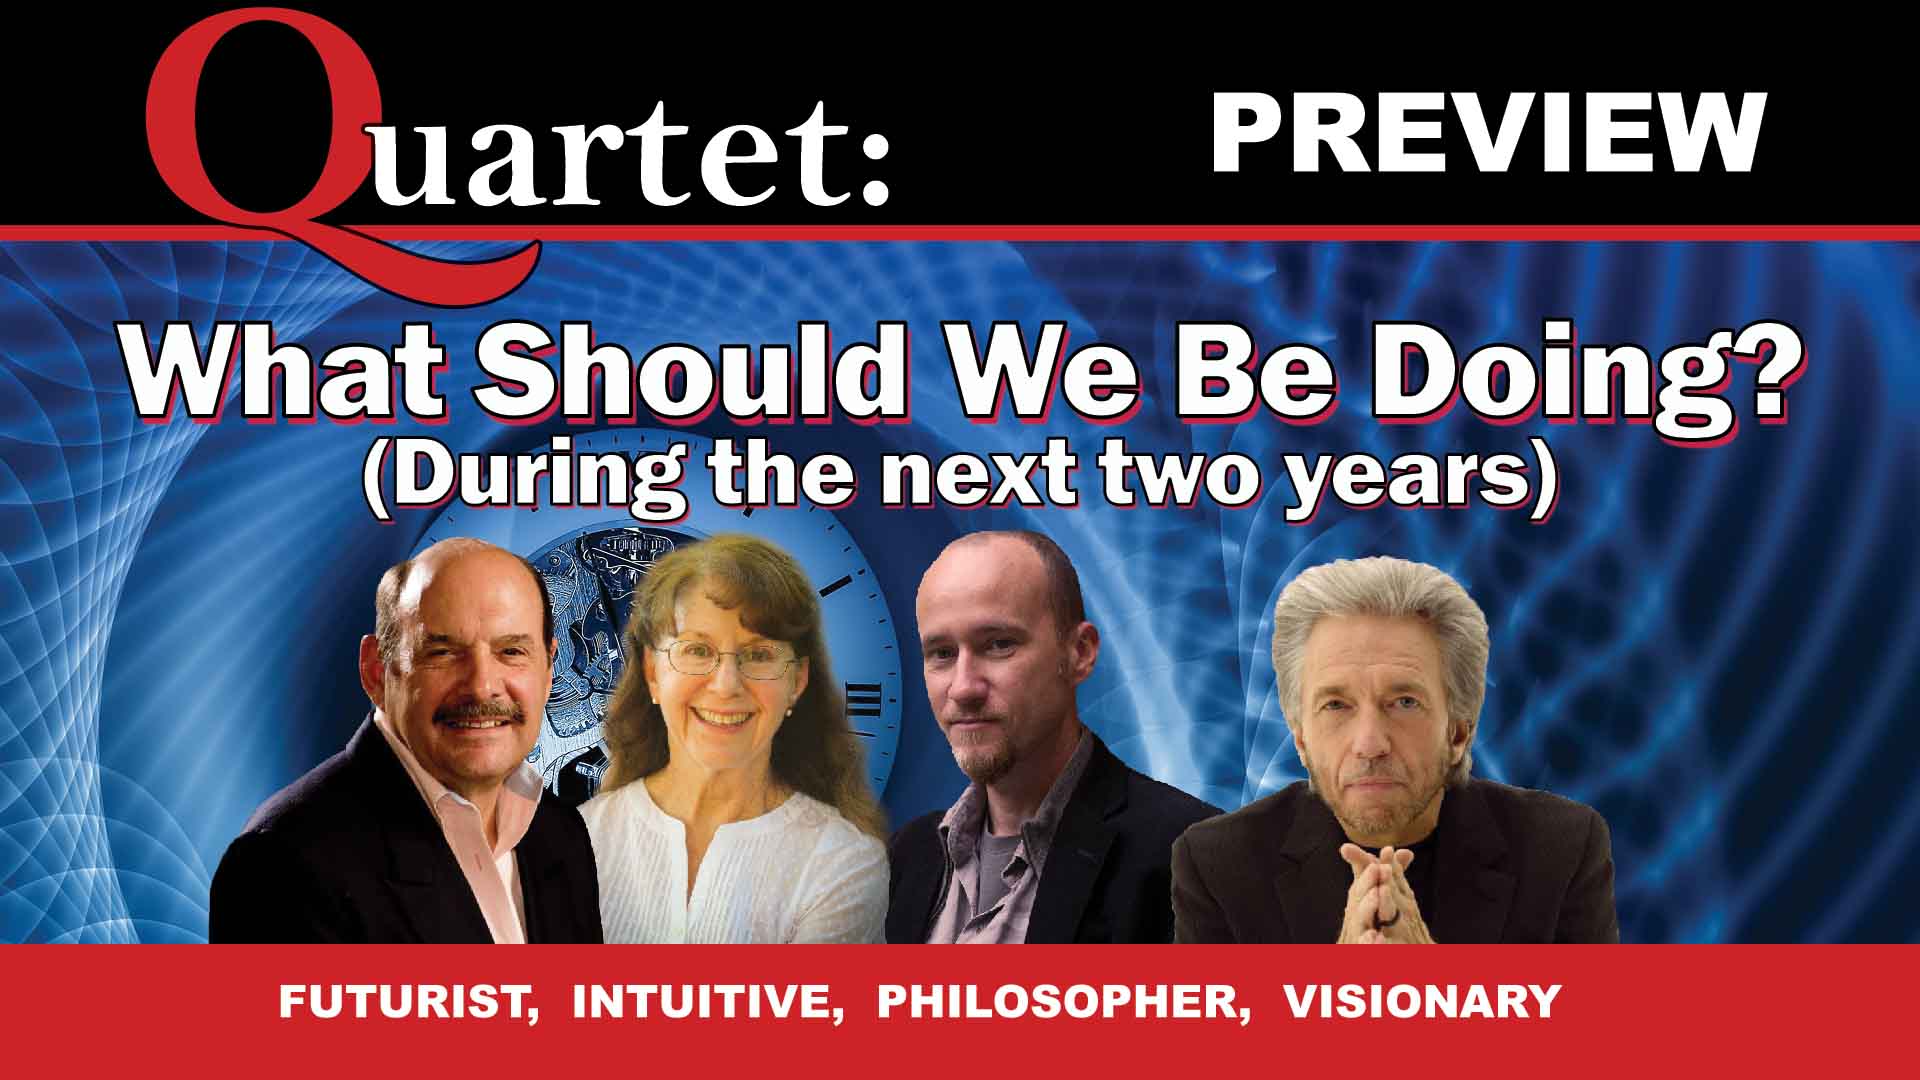 Quartet preview, What should we be doing, during the next two years